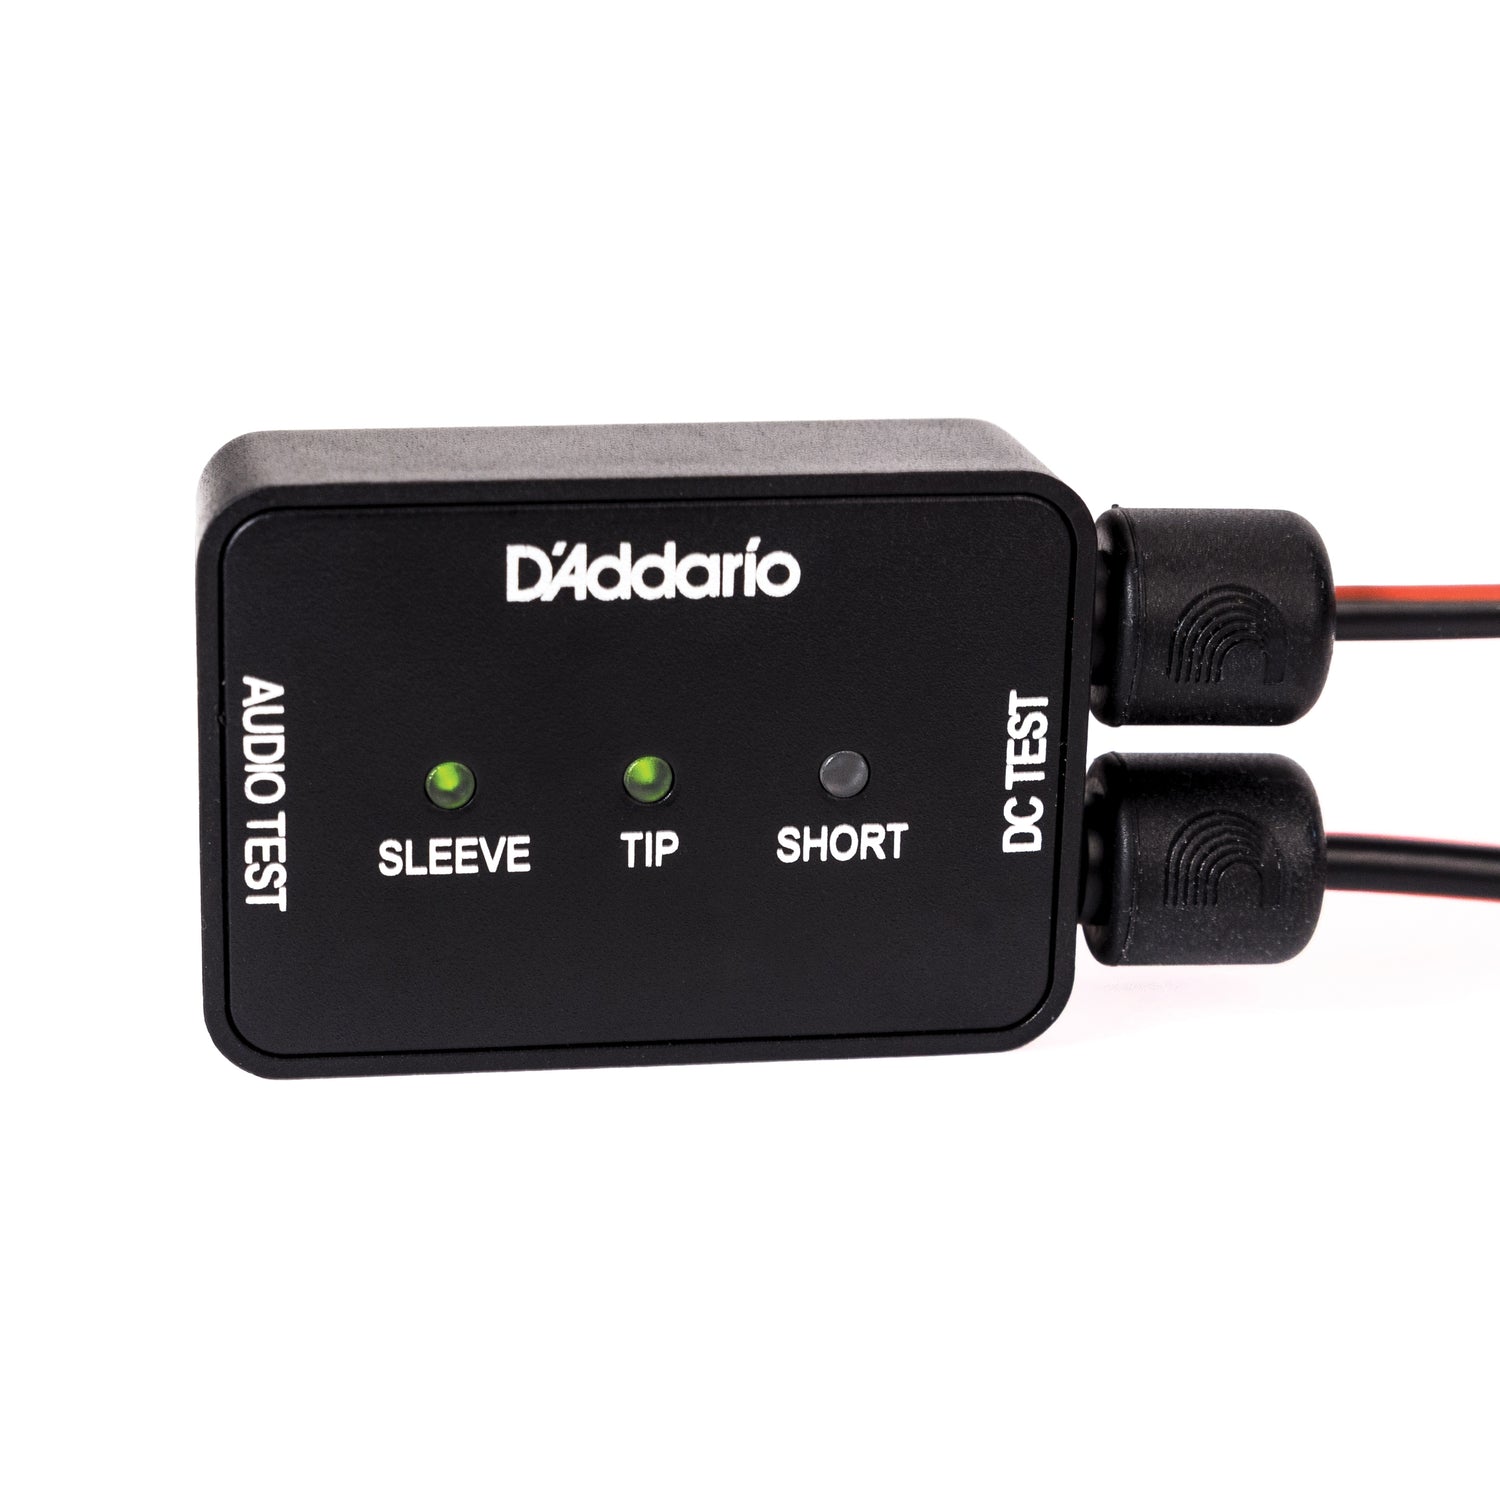 Image 15 of D'Addario Planet Waves DIY Solderless Pedalboard Power Cable Kit - SKU# PWRKIT : Product Type Effects & Signal Processors : Elderly Instruments